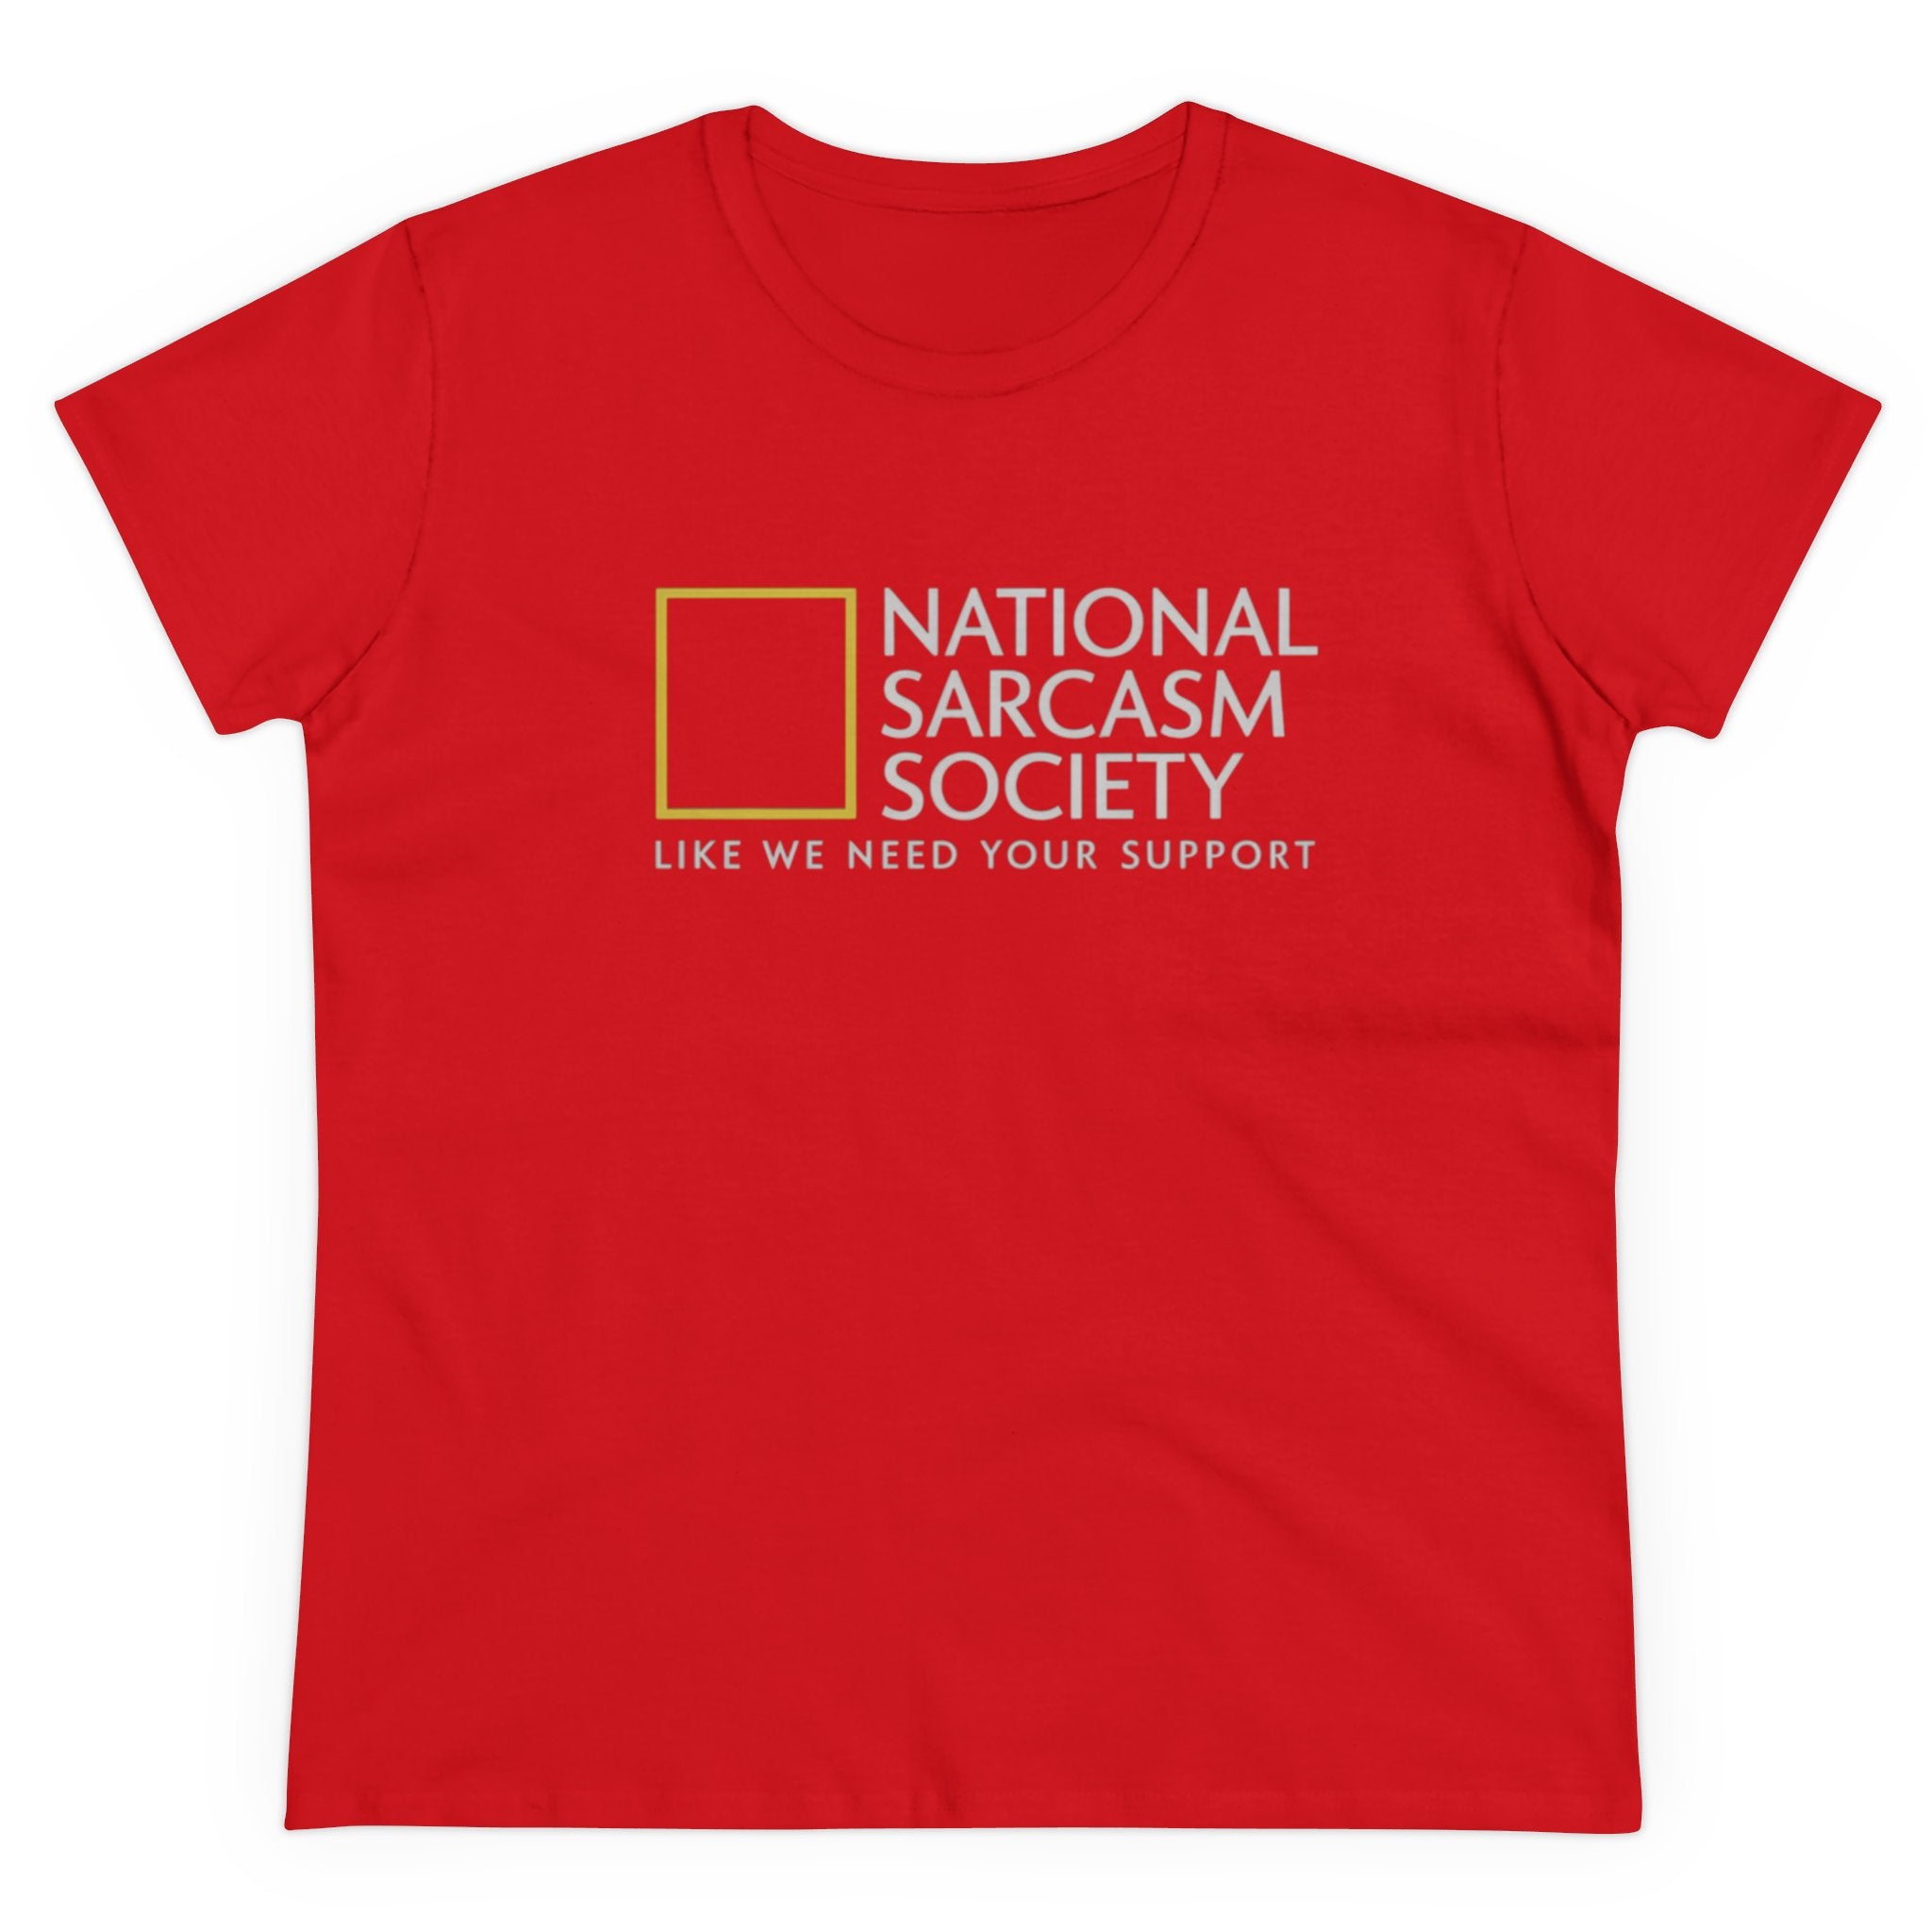 National Sarcasm Society - Women's Tee in red featuring the text "National Sarcasm Society: Like We Need Your Support" in bold white letters.